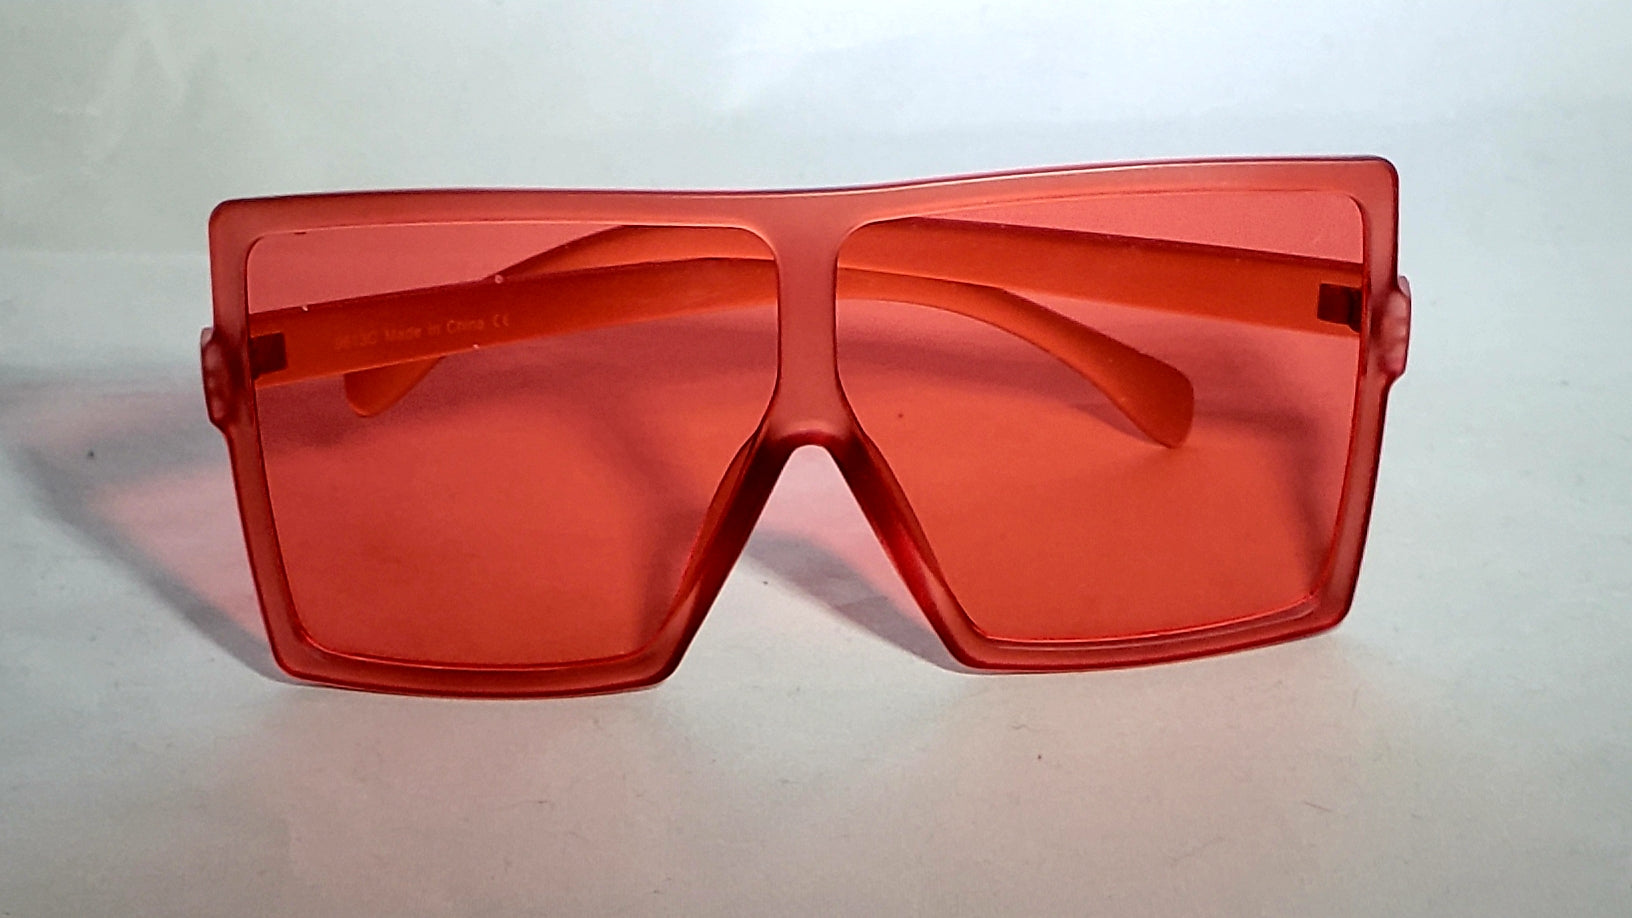 Candy Paint Sunglasses - available in 3 colors